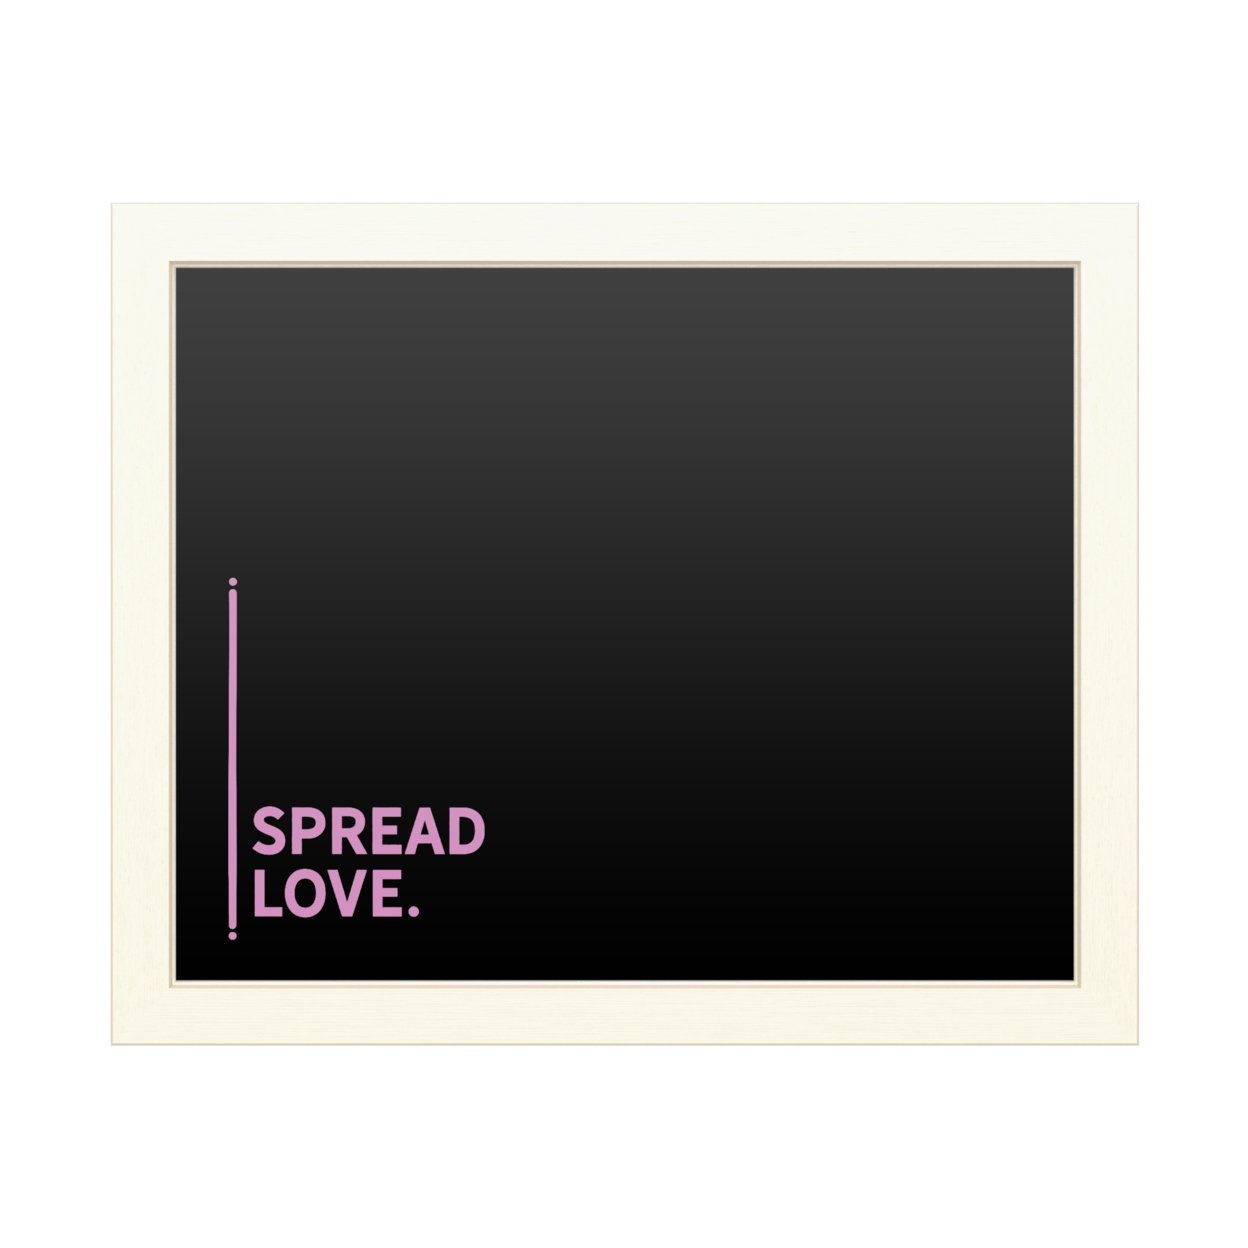 16 X 20 Chalk Board With Printed Artwork - Spread Love 2 White Board - Ready To Hang Chalkboard